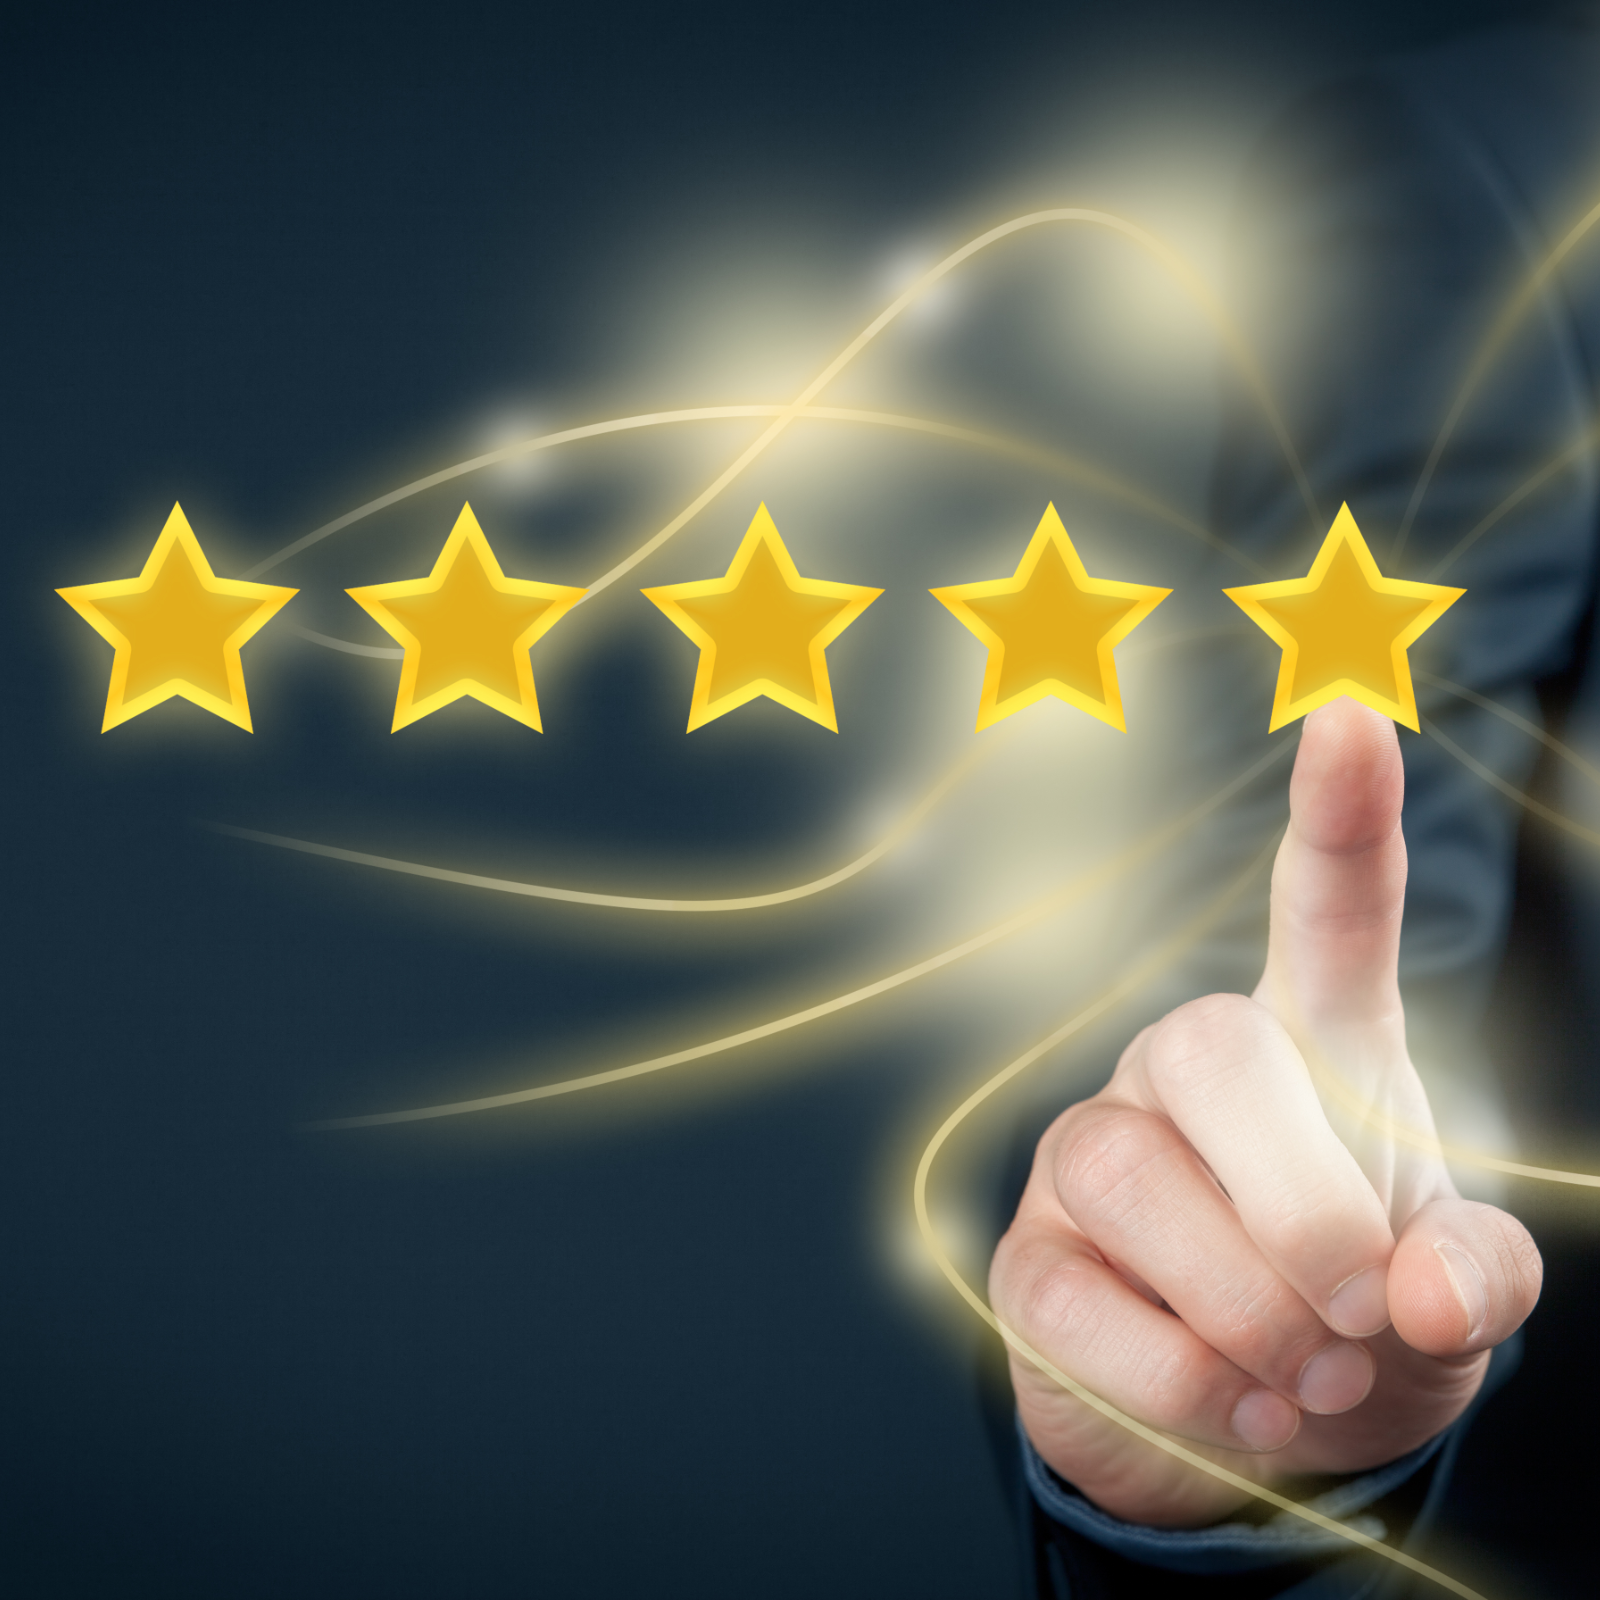 EF Hutton Initiates Coverage of 7 Cryptocurrencies - BCH Earns Five-Star Rating